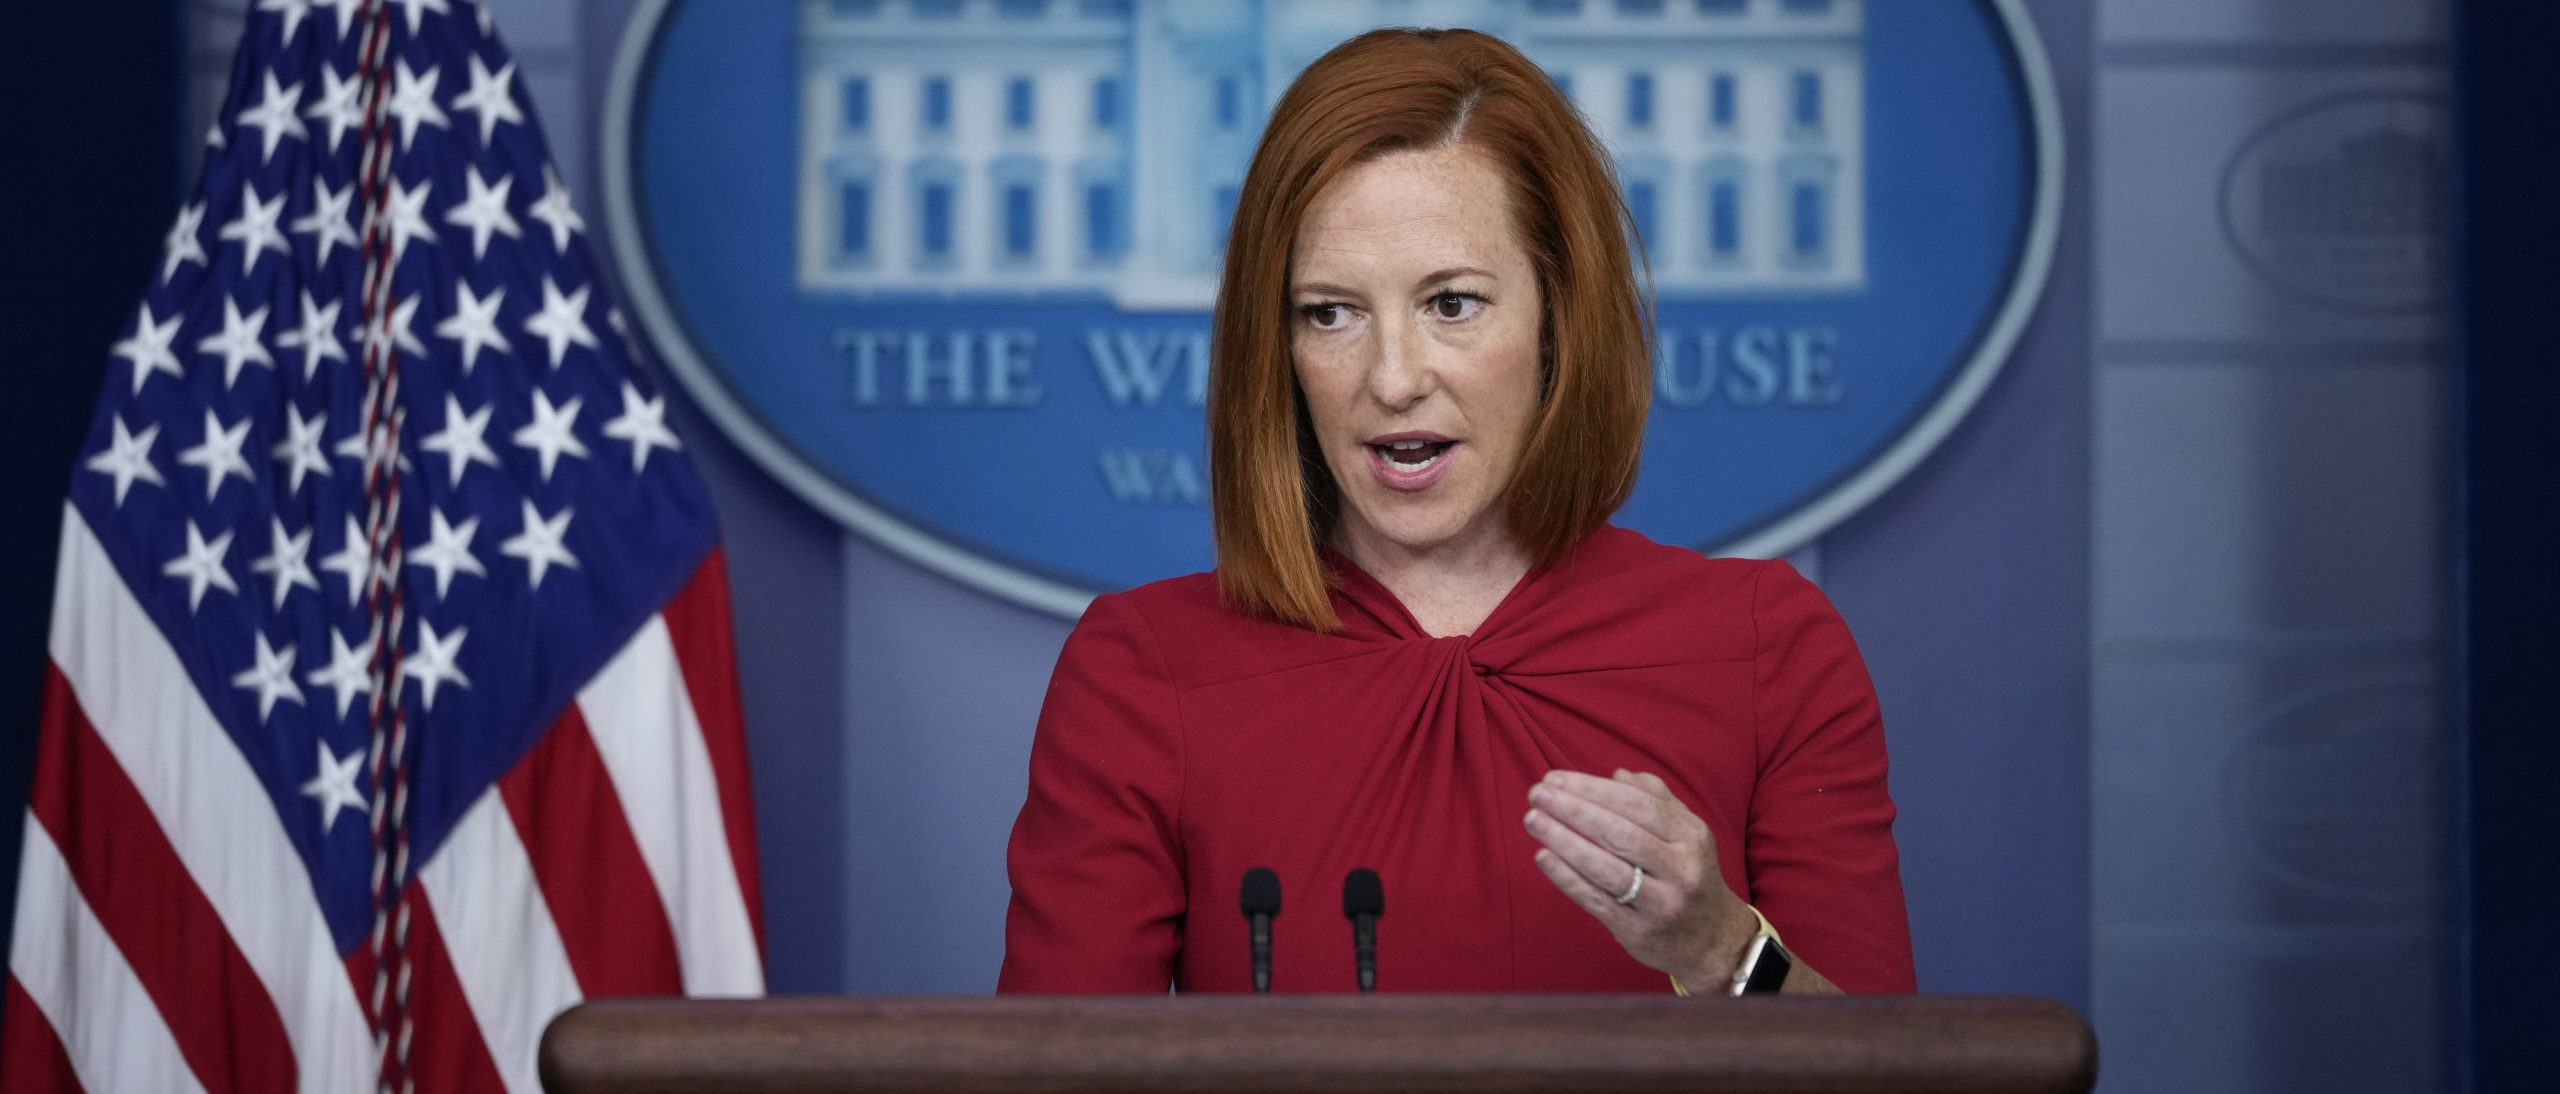 WASHINGTON, DC - JULY 19: White House Press Secretary Jen Psaki speaks during the daily press briefing at the White House on July 19, 2021 in Washington, DC. Later this afternoon, President Joe Biden will meet with King Abdullah II of Jordan.(Photo by Drew Angerer/Getty Images)